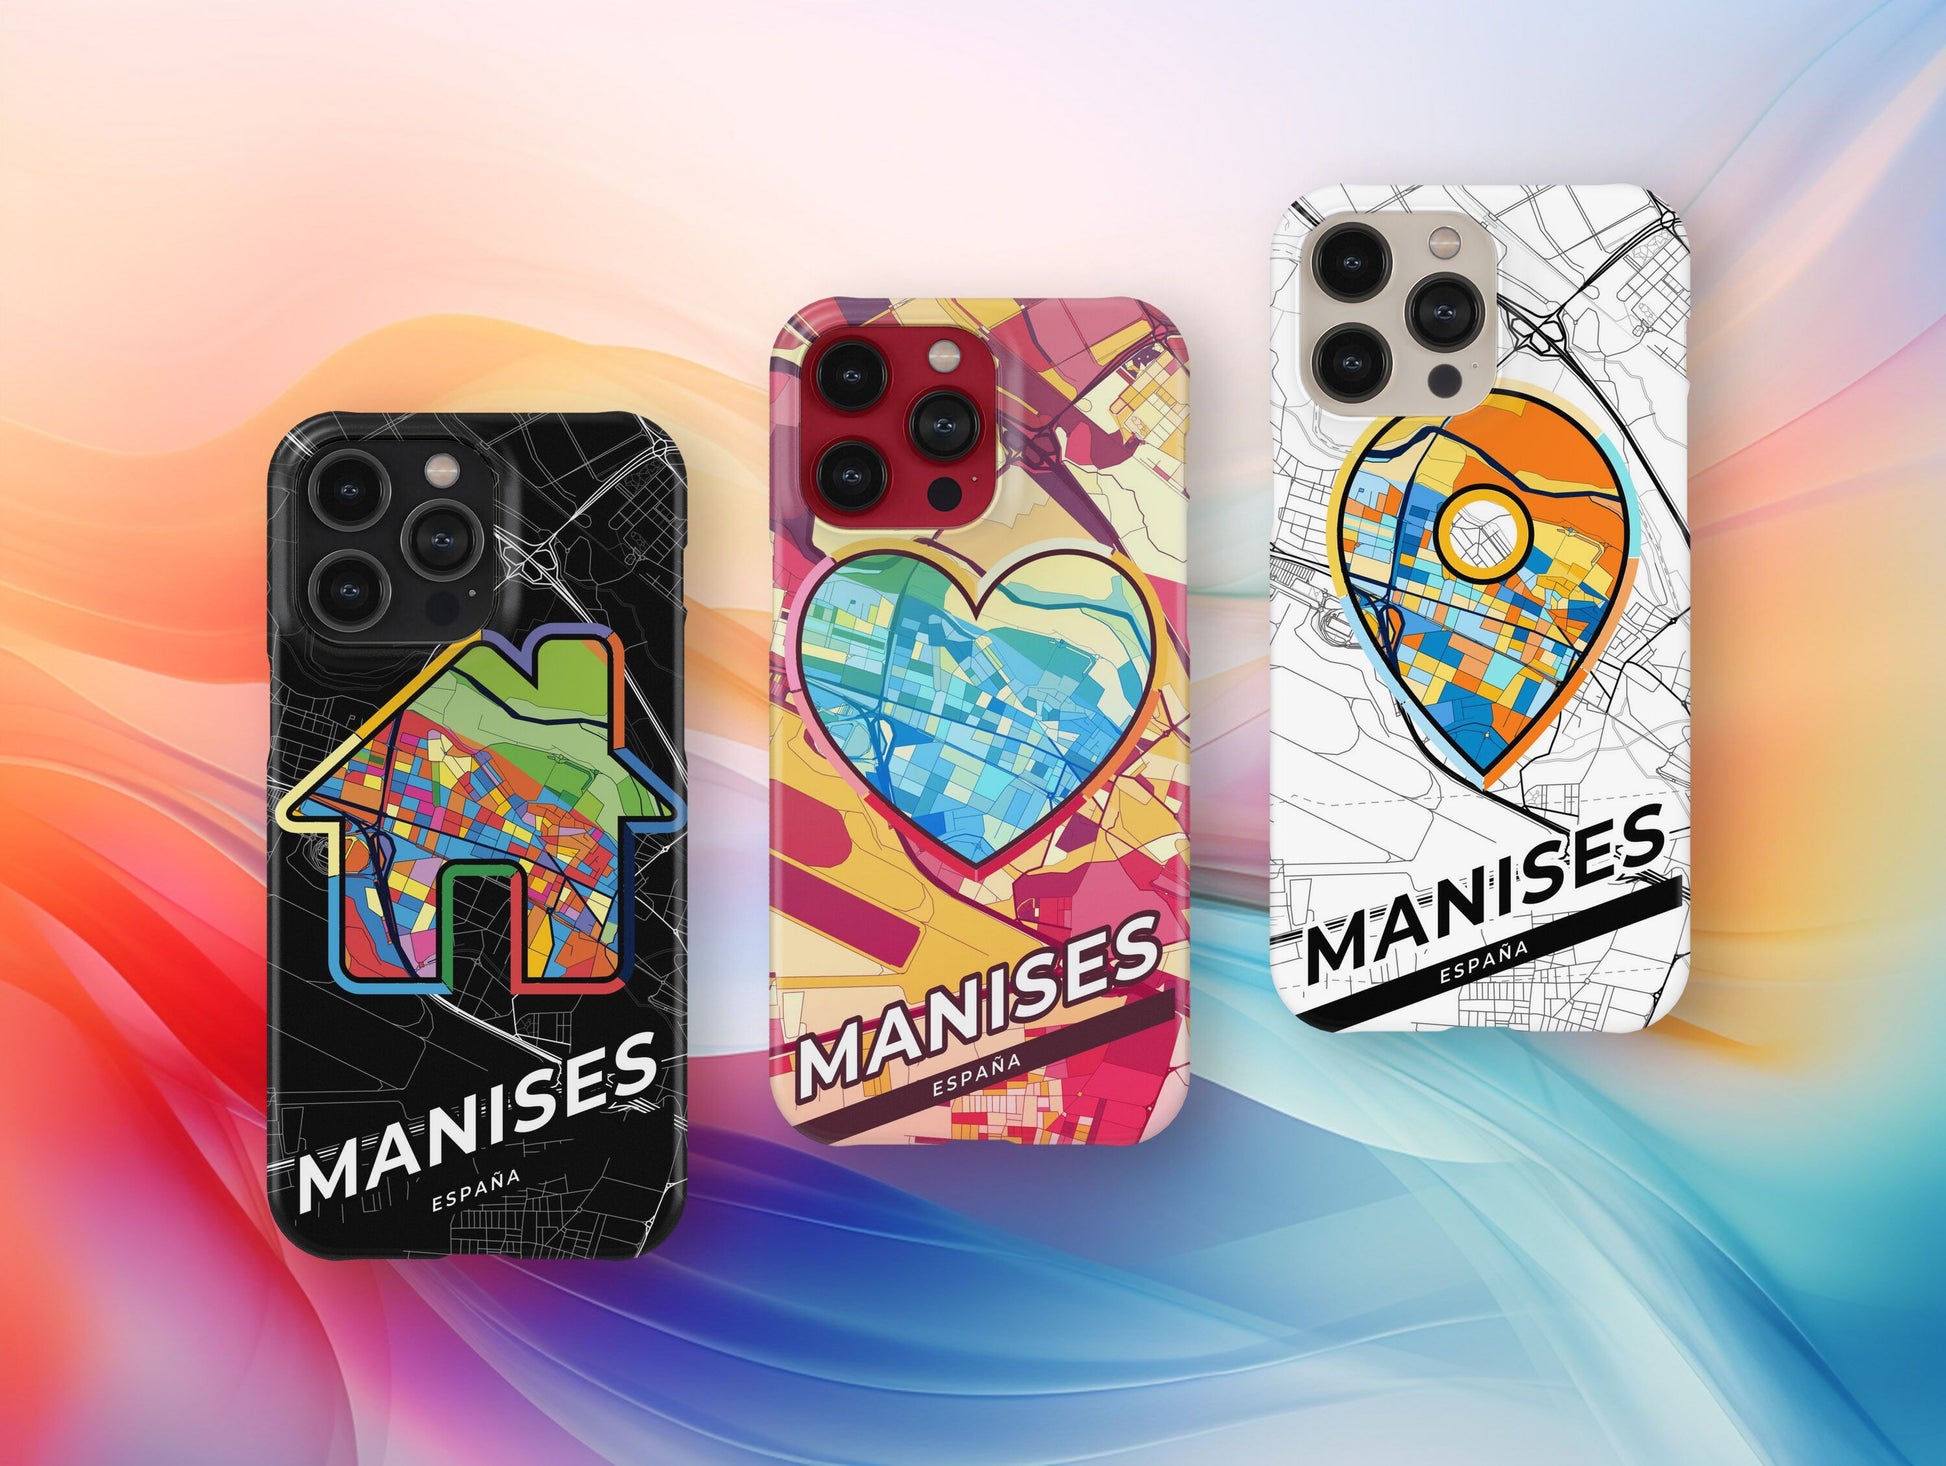 Manises Spain slim phone case with colorful icon. Birthday, wedding or housewarming gift. Couple match cases.